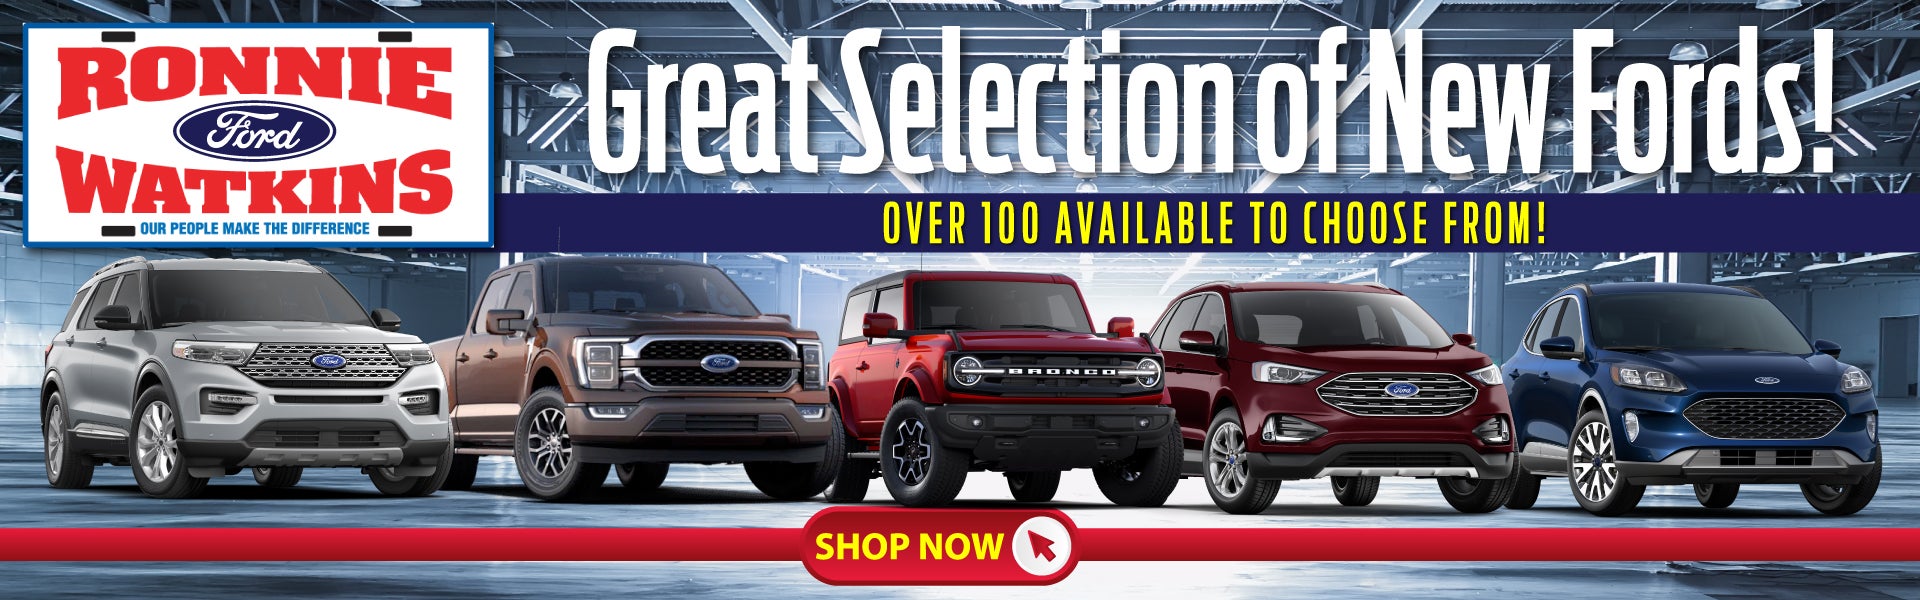 great selection of new fords!